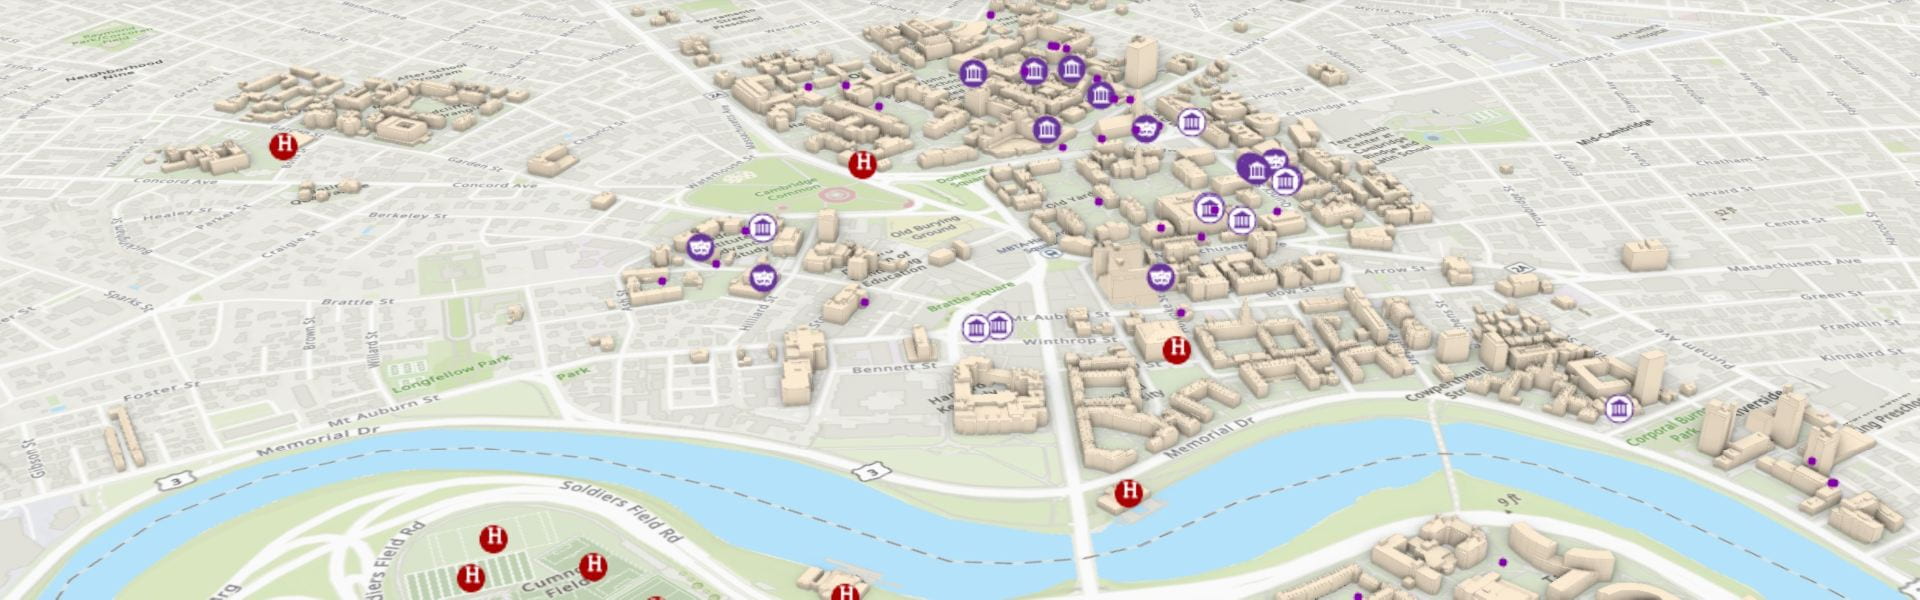 Map of Harvard campus showing athletic areas, museums, and theaters